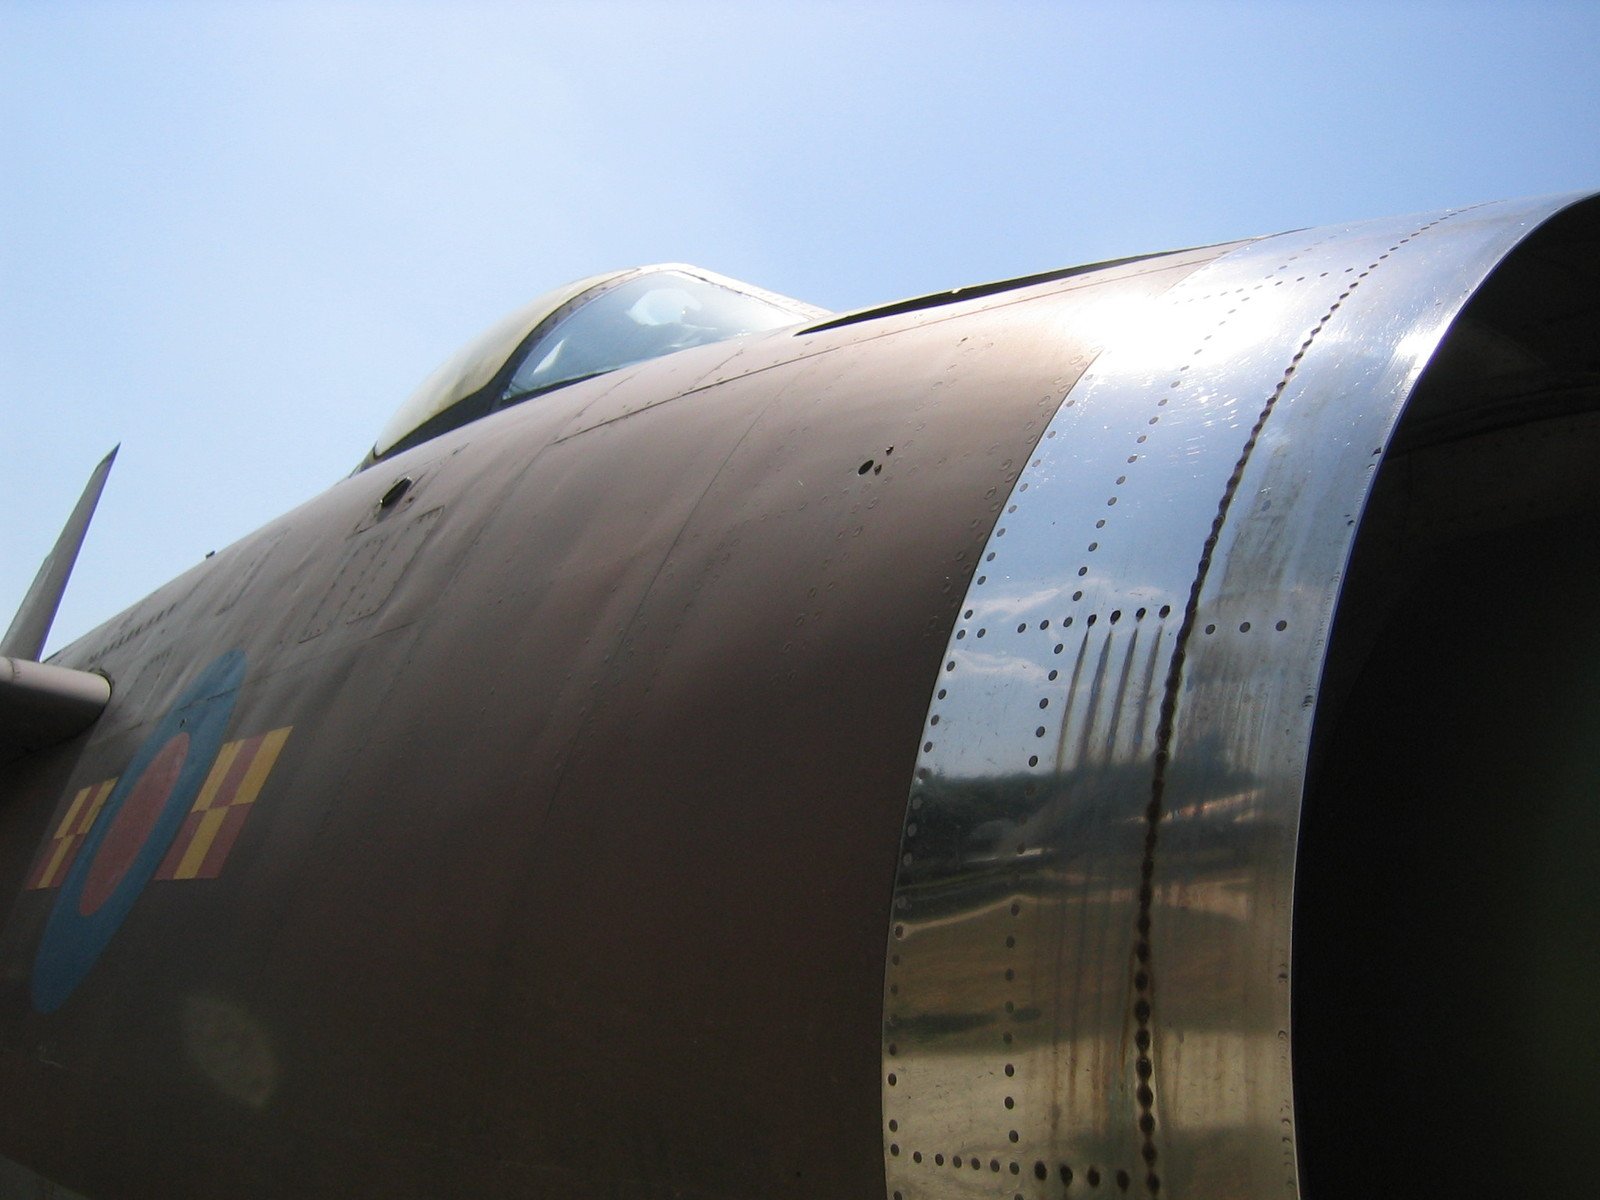 a close up view of the nose and wing